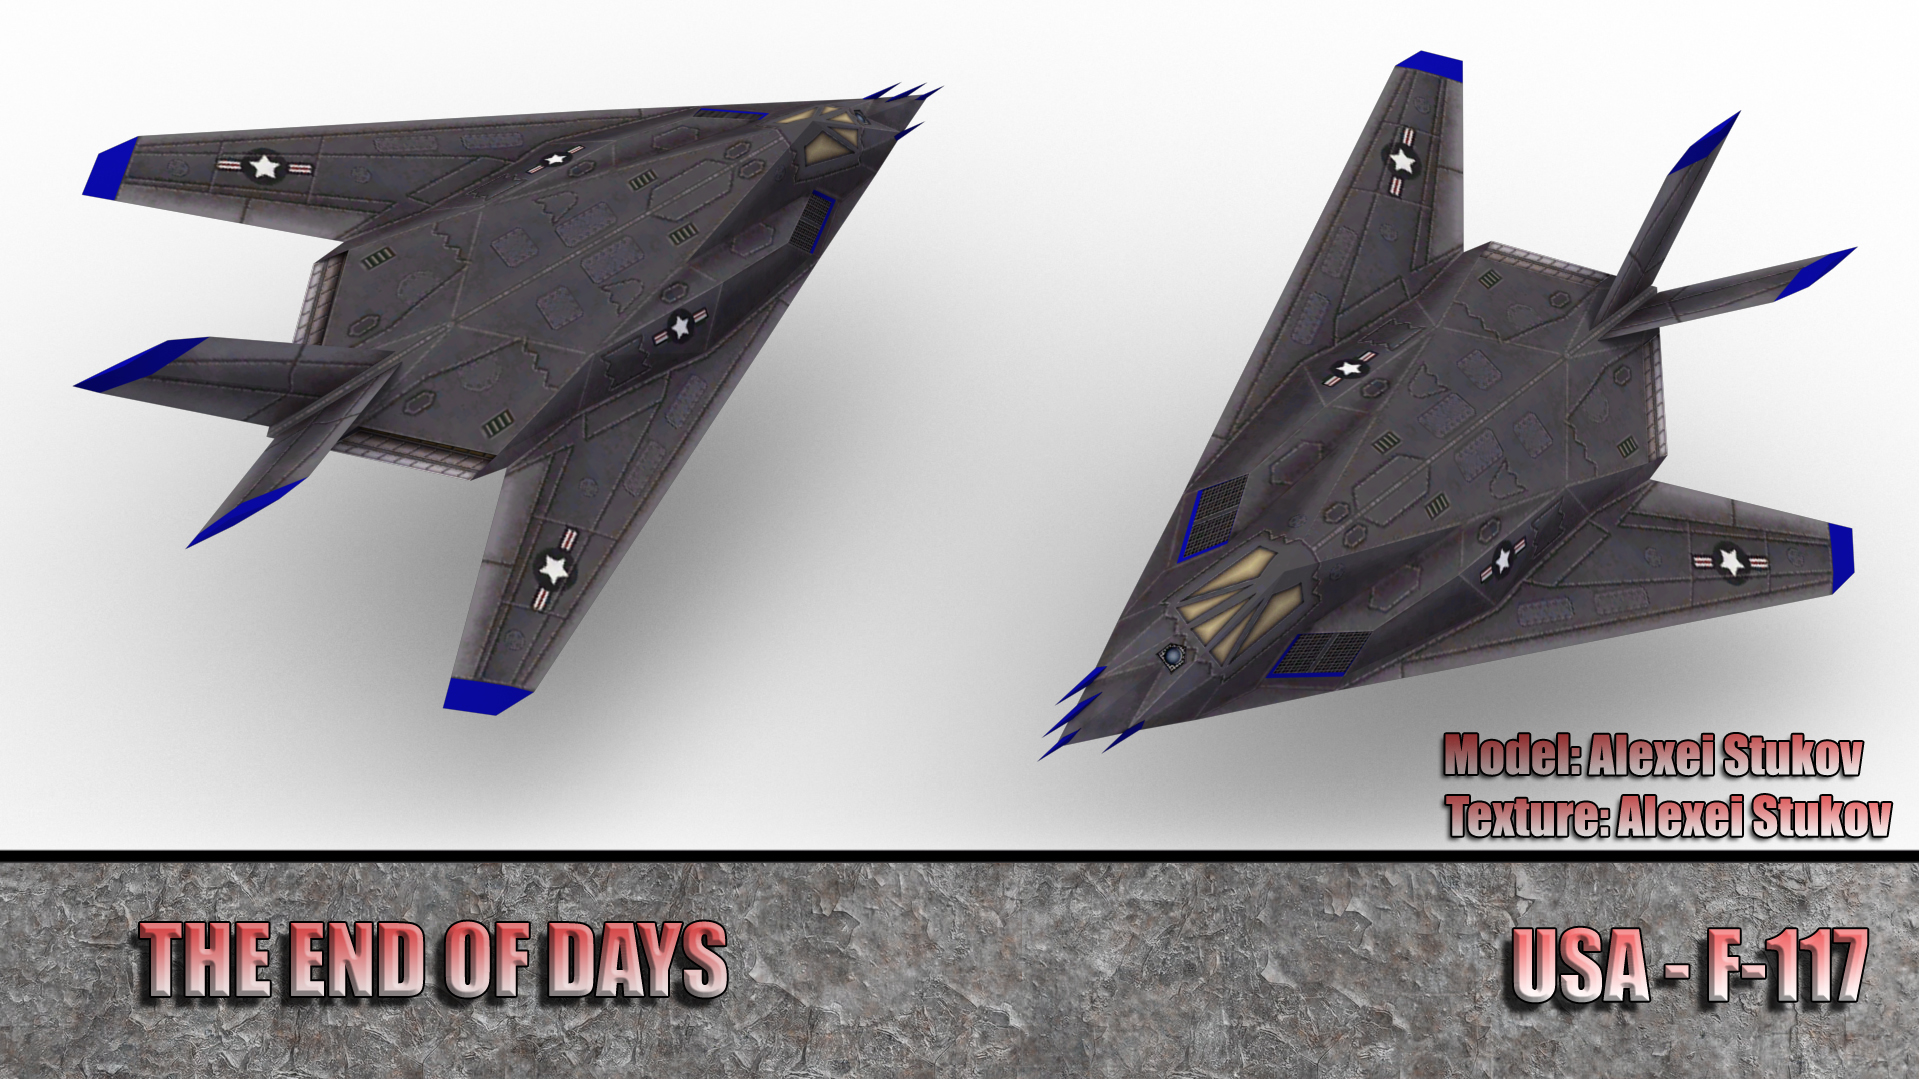 USA F-117 stealth Bomber (Nighthawk) image - The End of Days mod for C ...